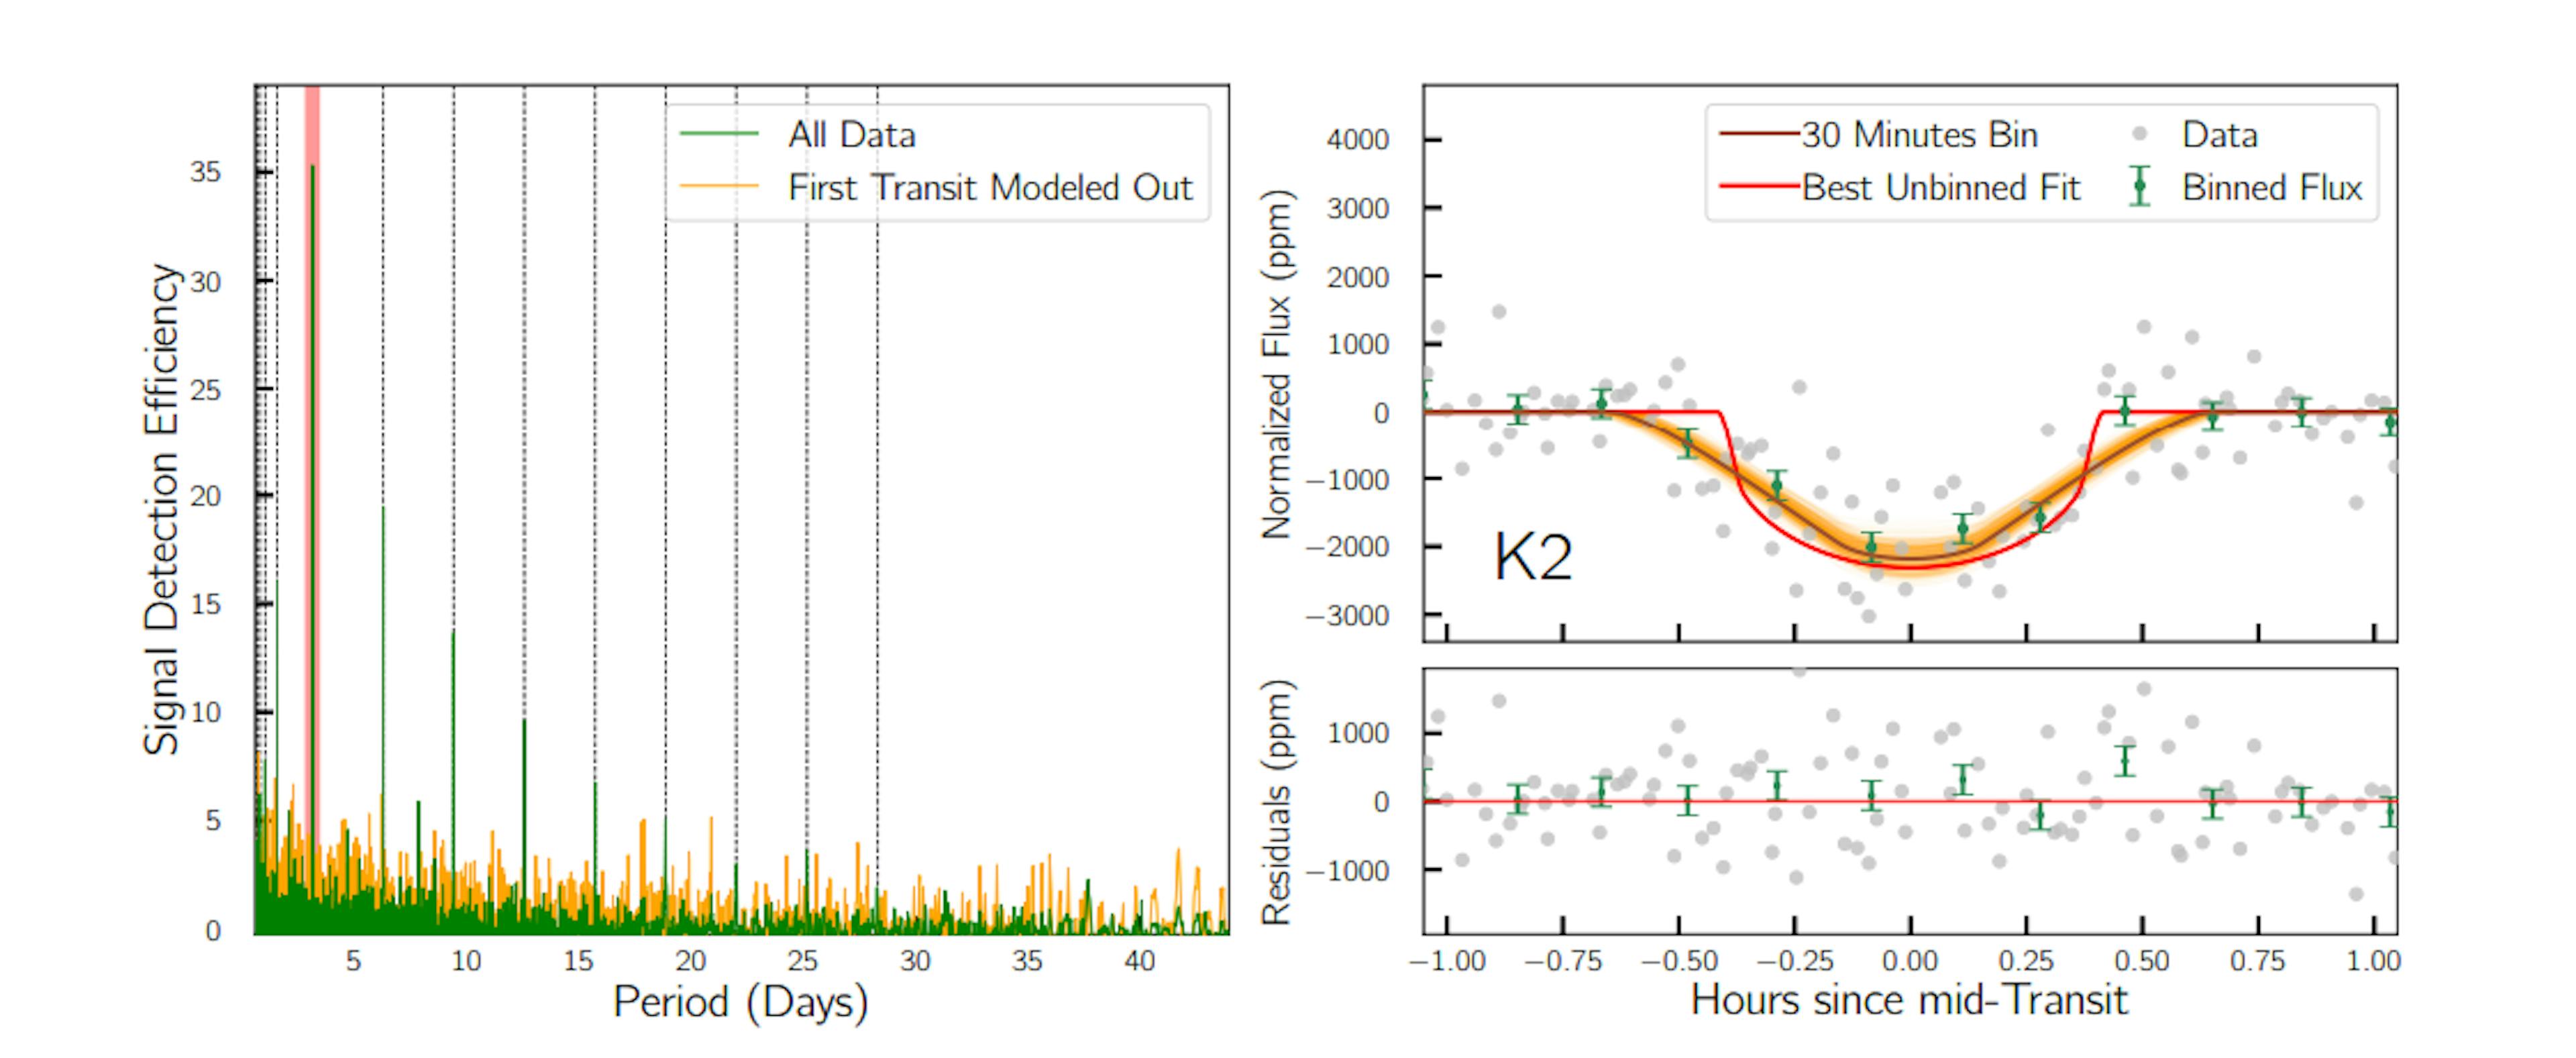 Figure 2. Left: SDE obtained from TLS showing the strongest peak at ∼3.14 days marked in red and its aliases marked with black dotted lines. No significant additional peaks were observed once the first signal was modeled out. Right: Best-fit transit model for K2 data is shown in red. The brown line is the model taking into account the integration time of 29.4 minutes for K2. The orange lines illustrate 350 random models drawn from the posterior distributions of the fitted parameters.